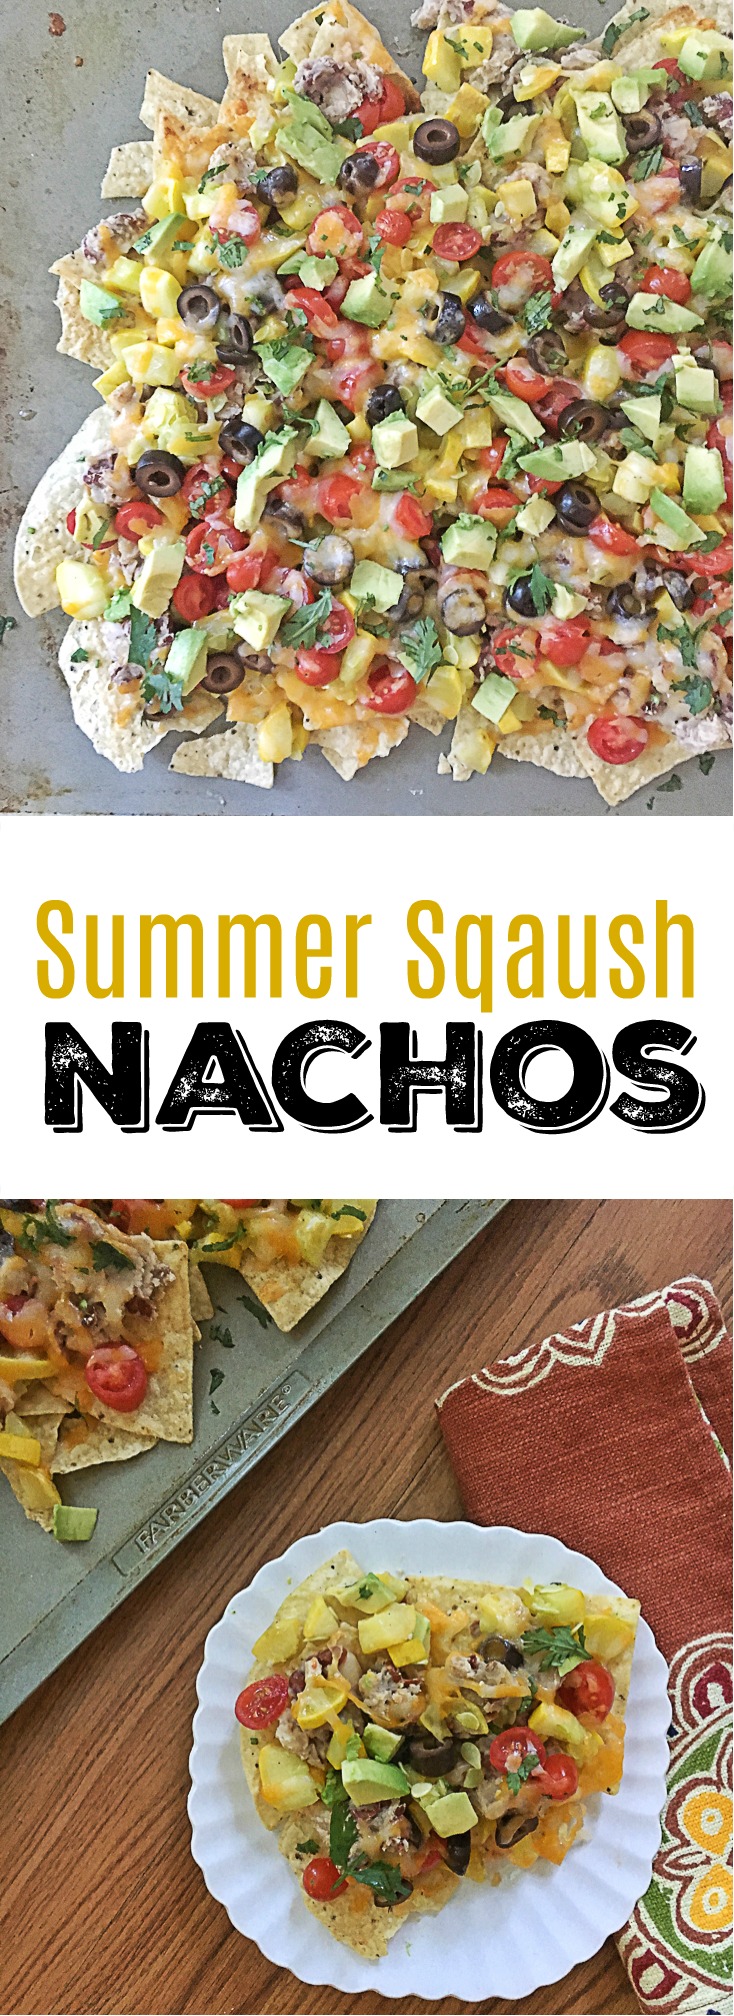 Nachos for breakfast? This dietitian says yes if they're packed with beans and veggies! Summer Squash Nachos recipes at Teaspoonofspice.com